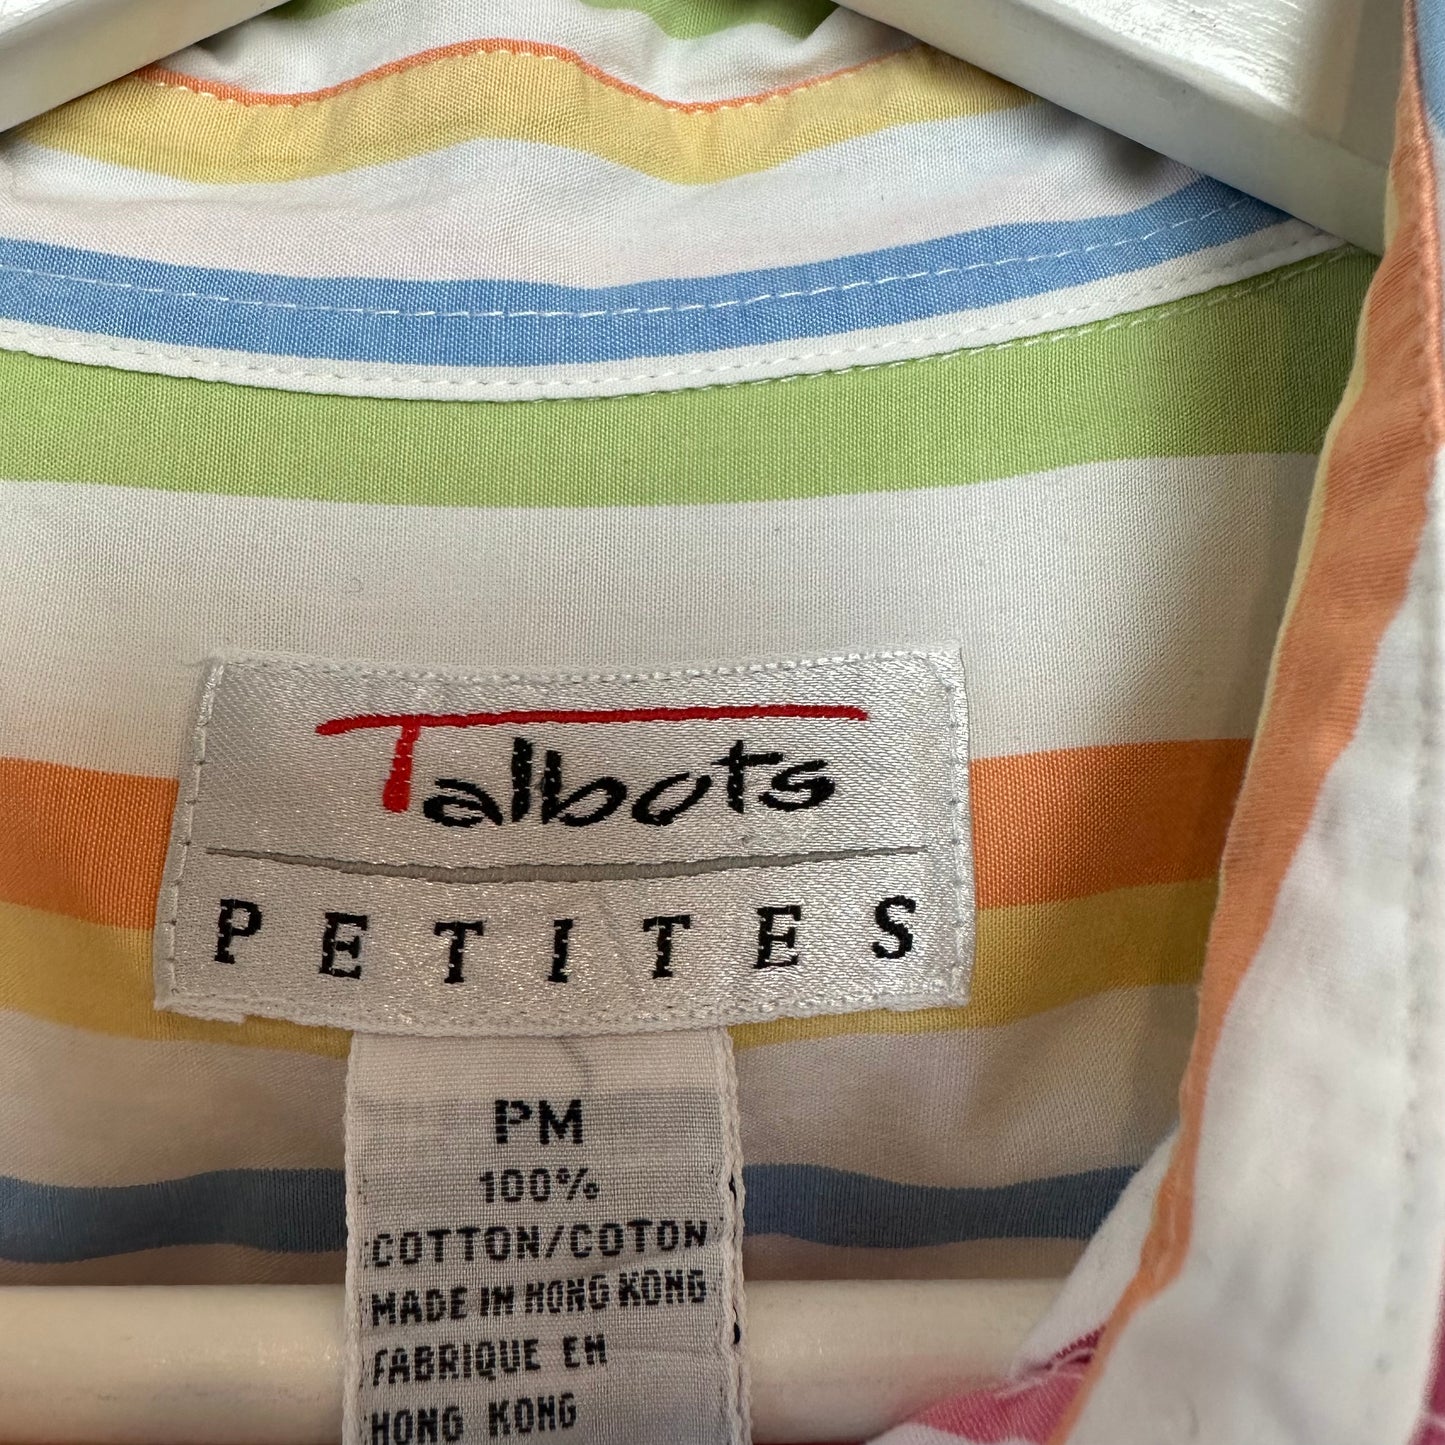 Vintage 90s Talbots Colorful Striped Button Up Collared Shirt Cotton Medium Petite